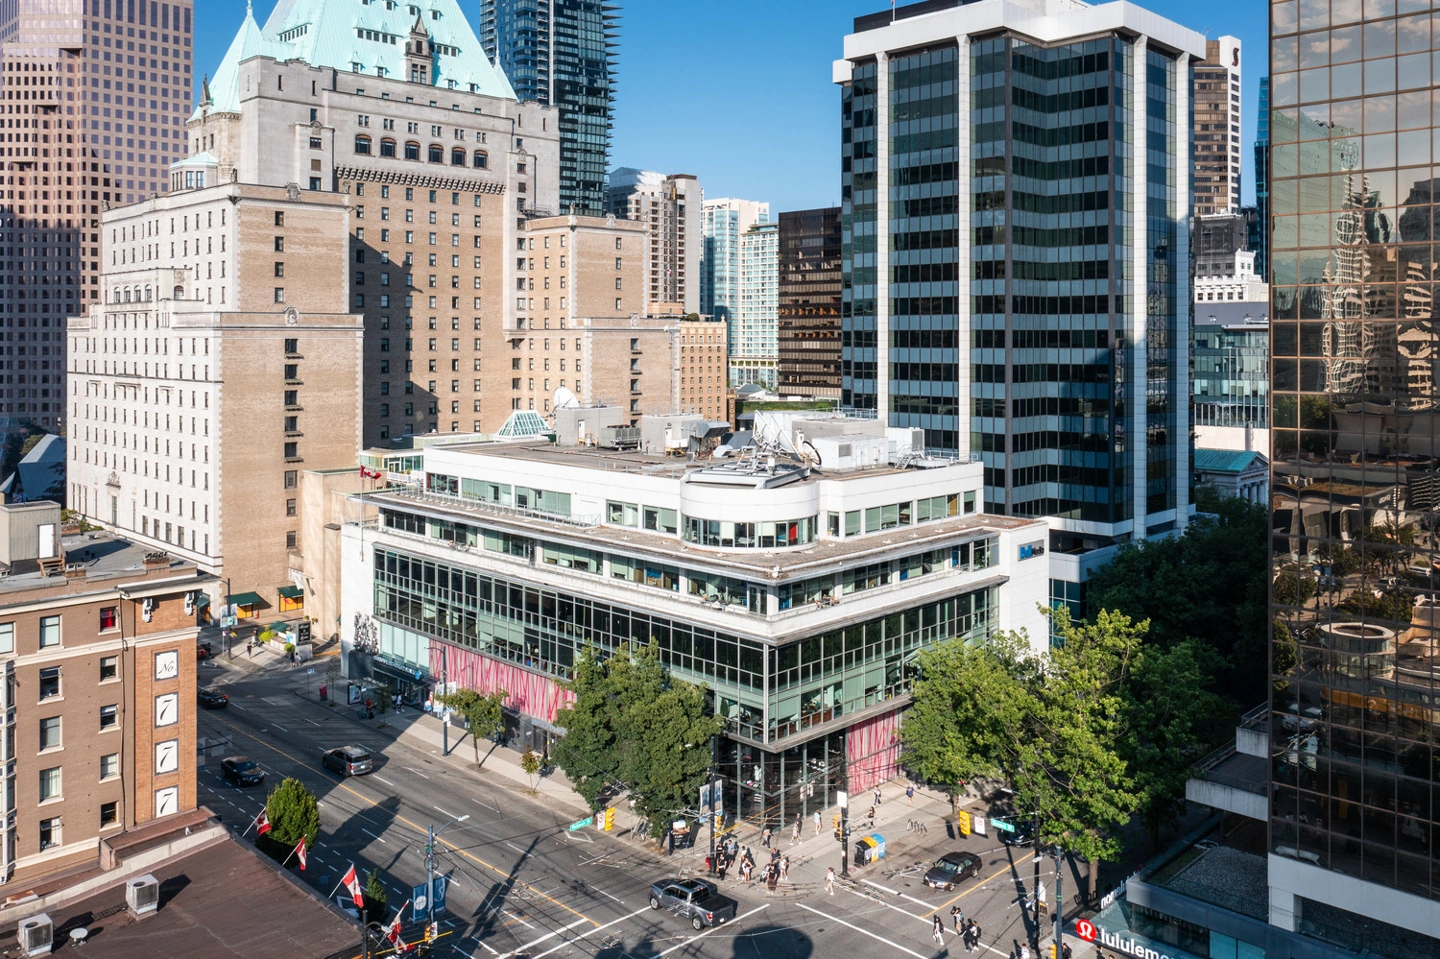 969 Robson Street, 969 Robson Street, Vancouver, British Columbia, V6Z 2V7, Office, For Lease